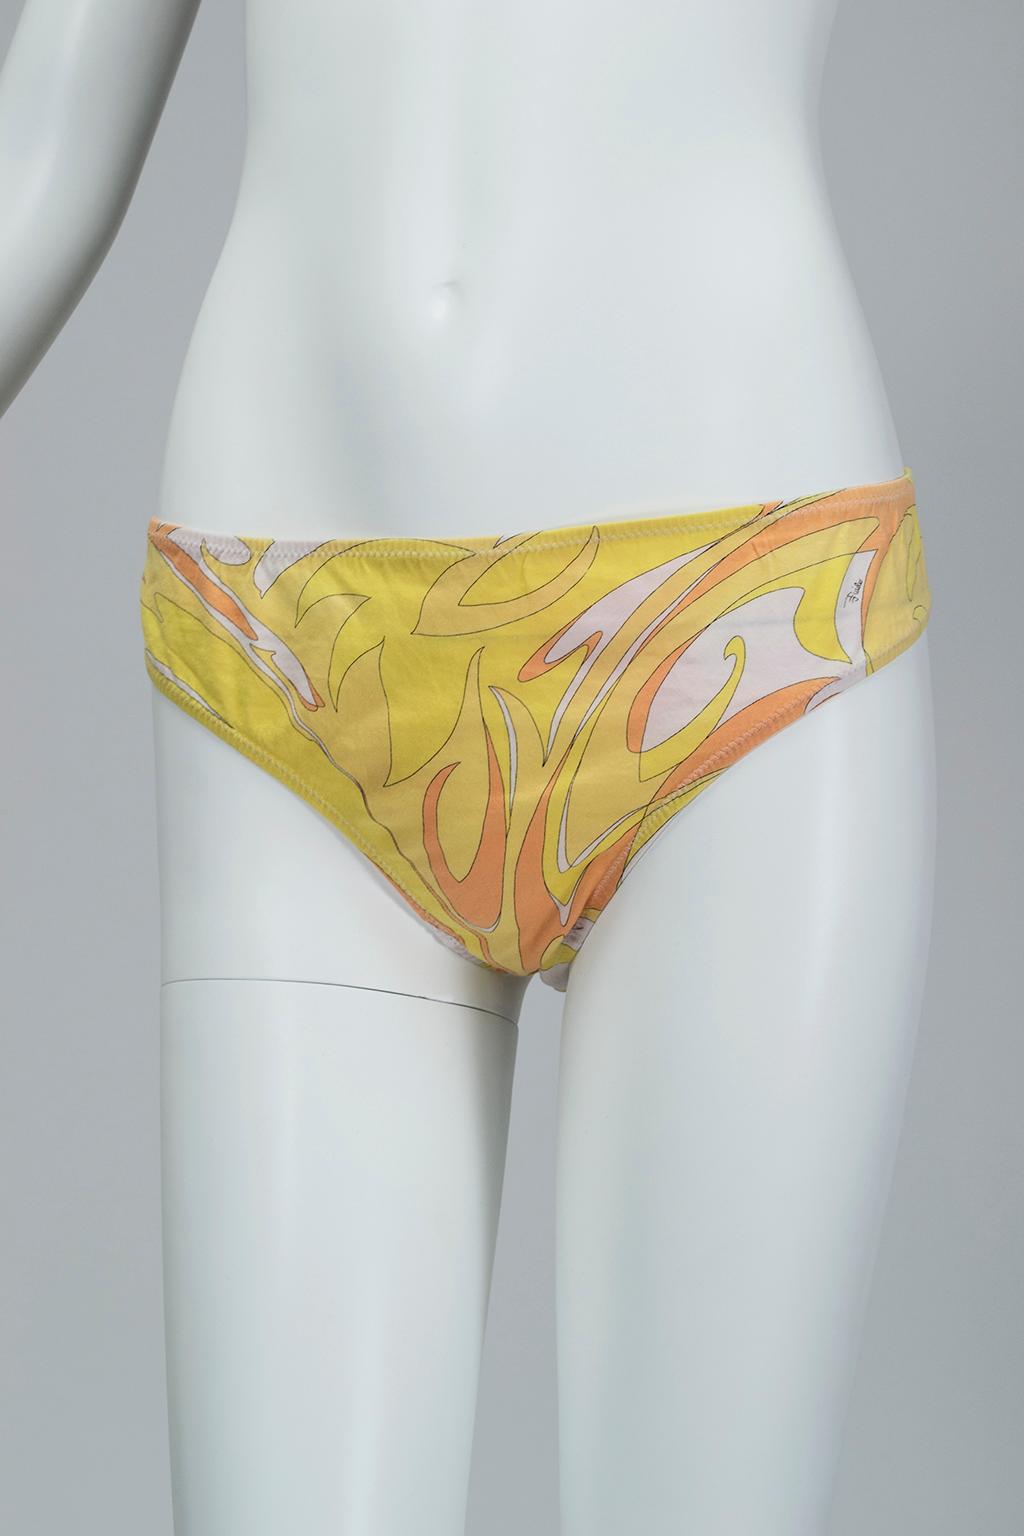 Emilio Pucci Pink Yellow Psychedelic Lounge Bra and Panty Set- S-M, 21st Century For Sale 1